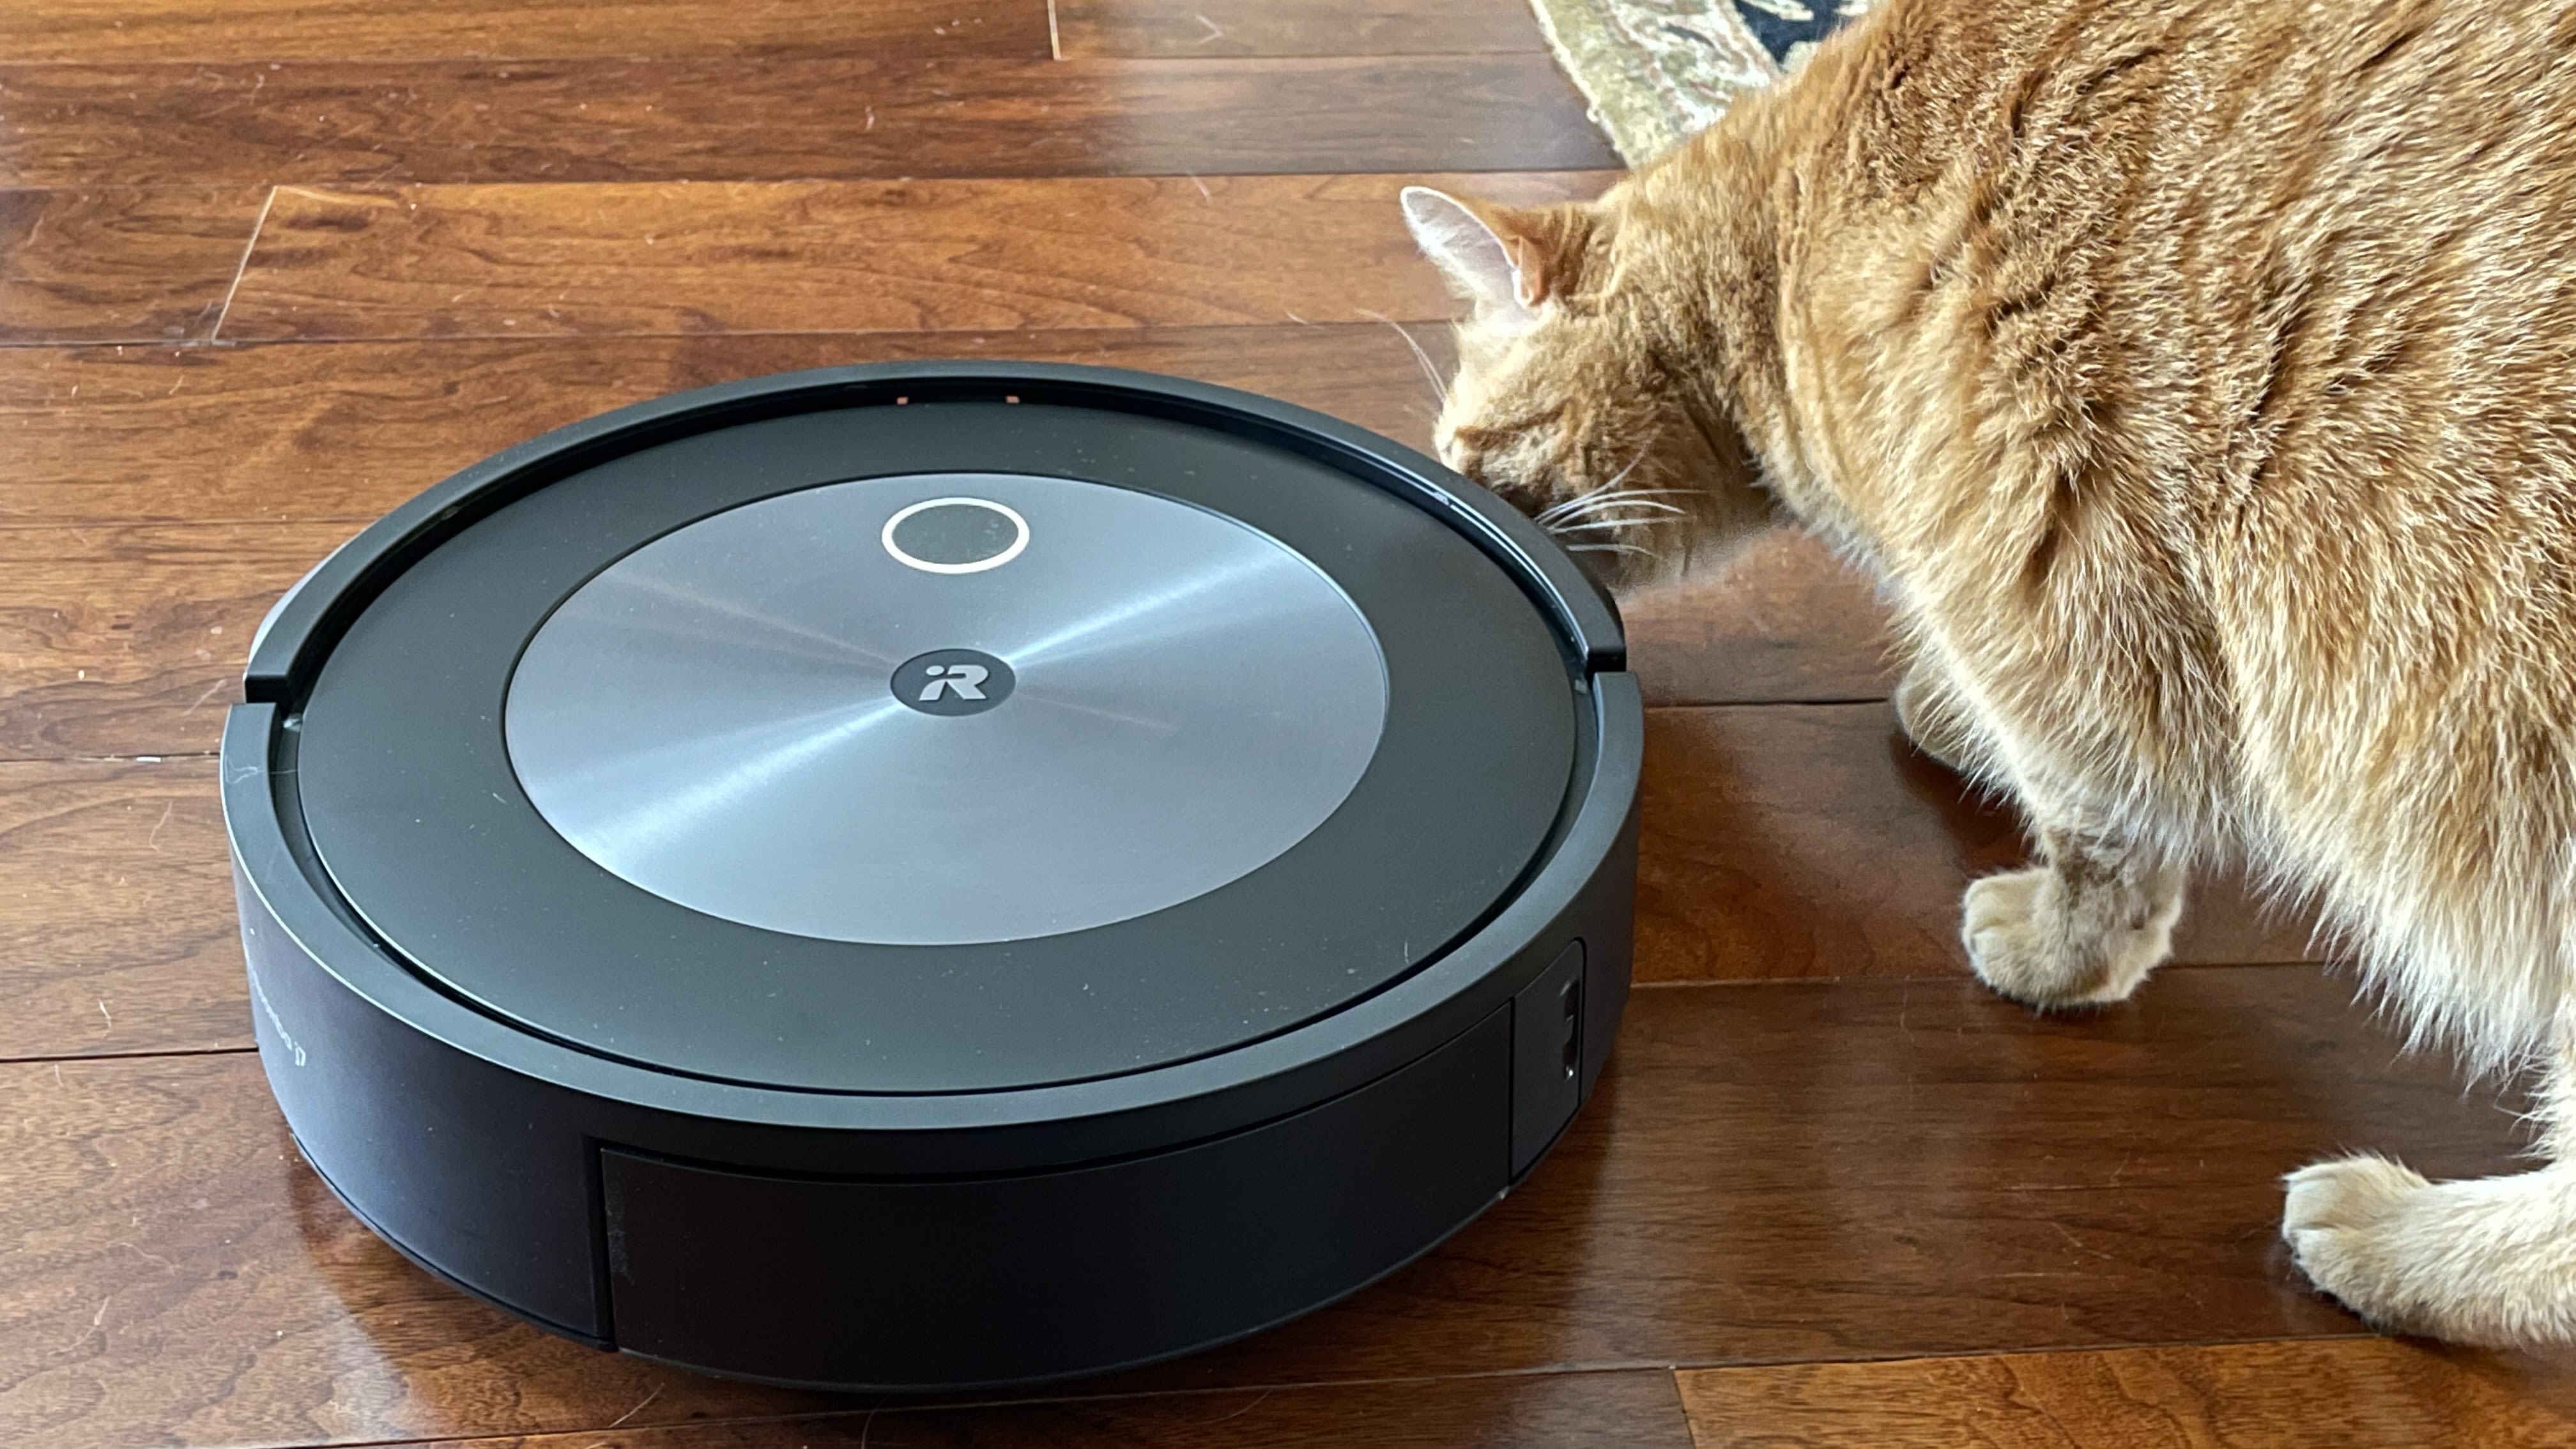 The best robot vacuums of 2021